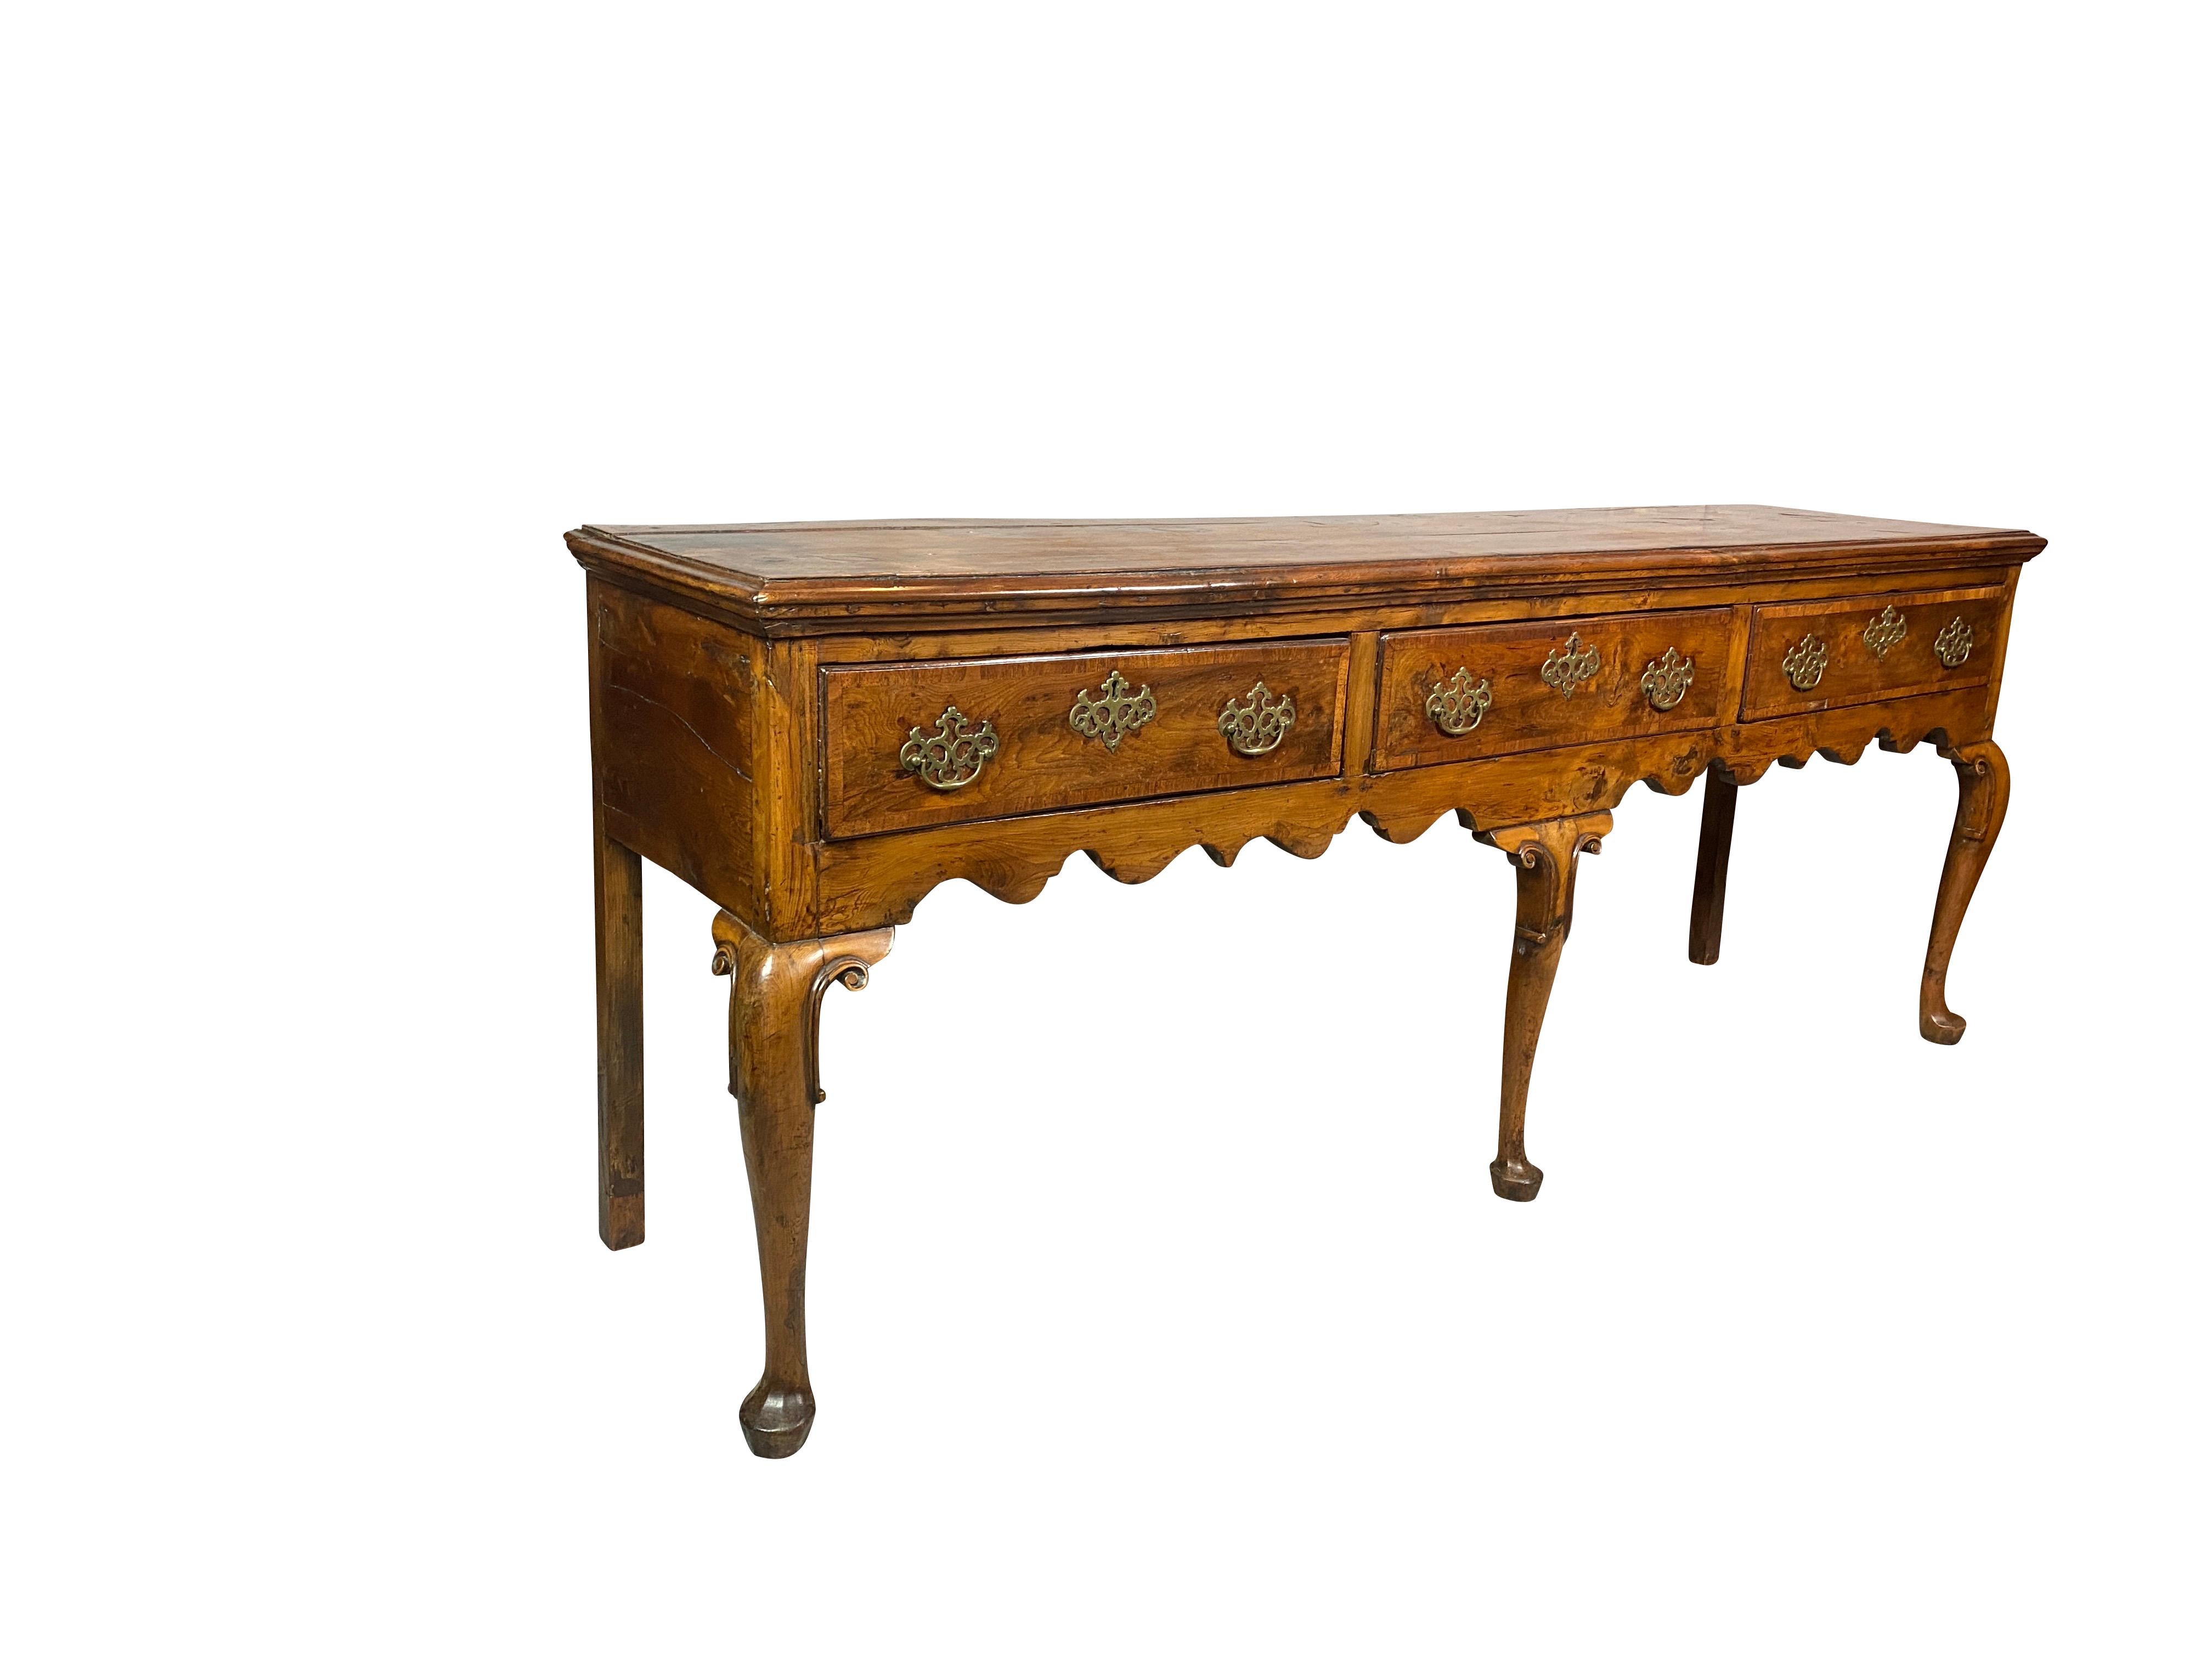 Rectangular top with beautiful rich color, molded edge over three drawers with cross banded edges, brass handles, raised on cabriole legs with scroll decoration at top of legs, ending on pad feet. Purchased in London in the 1970s.